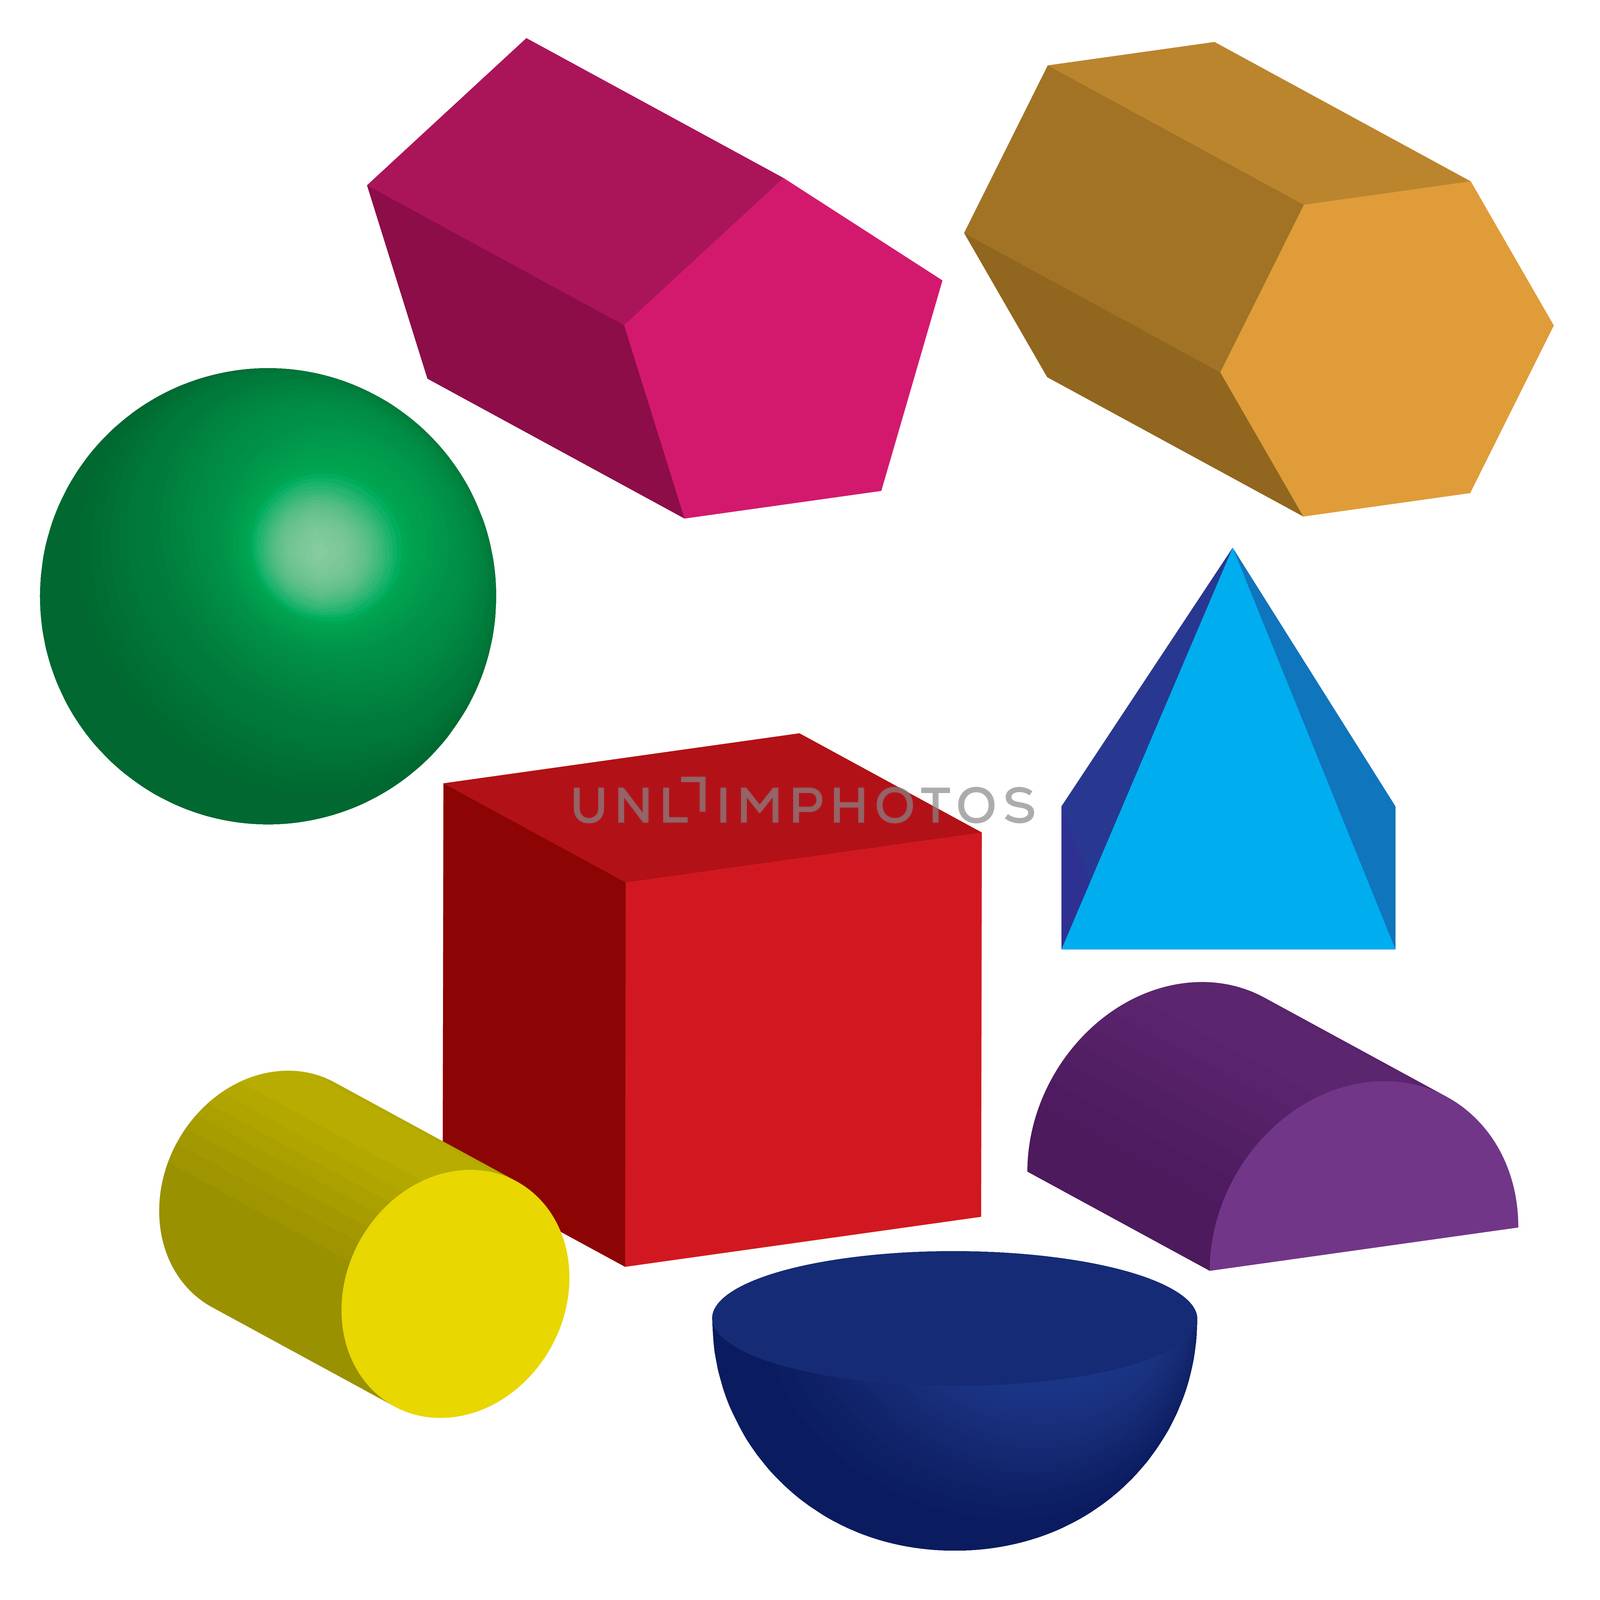 An Illustration of 3d shapes isolated on clean background